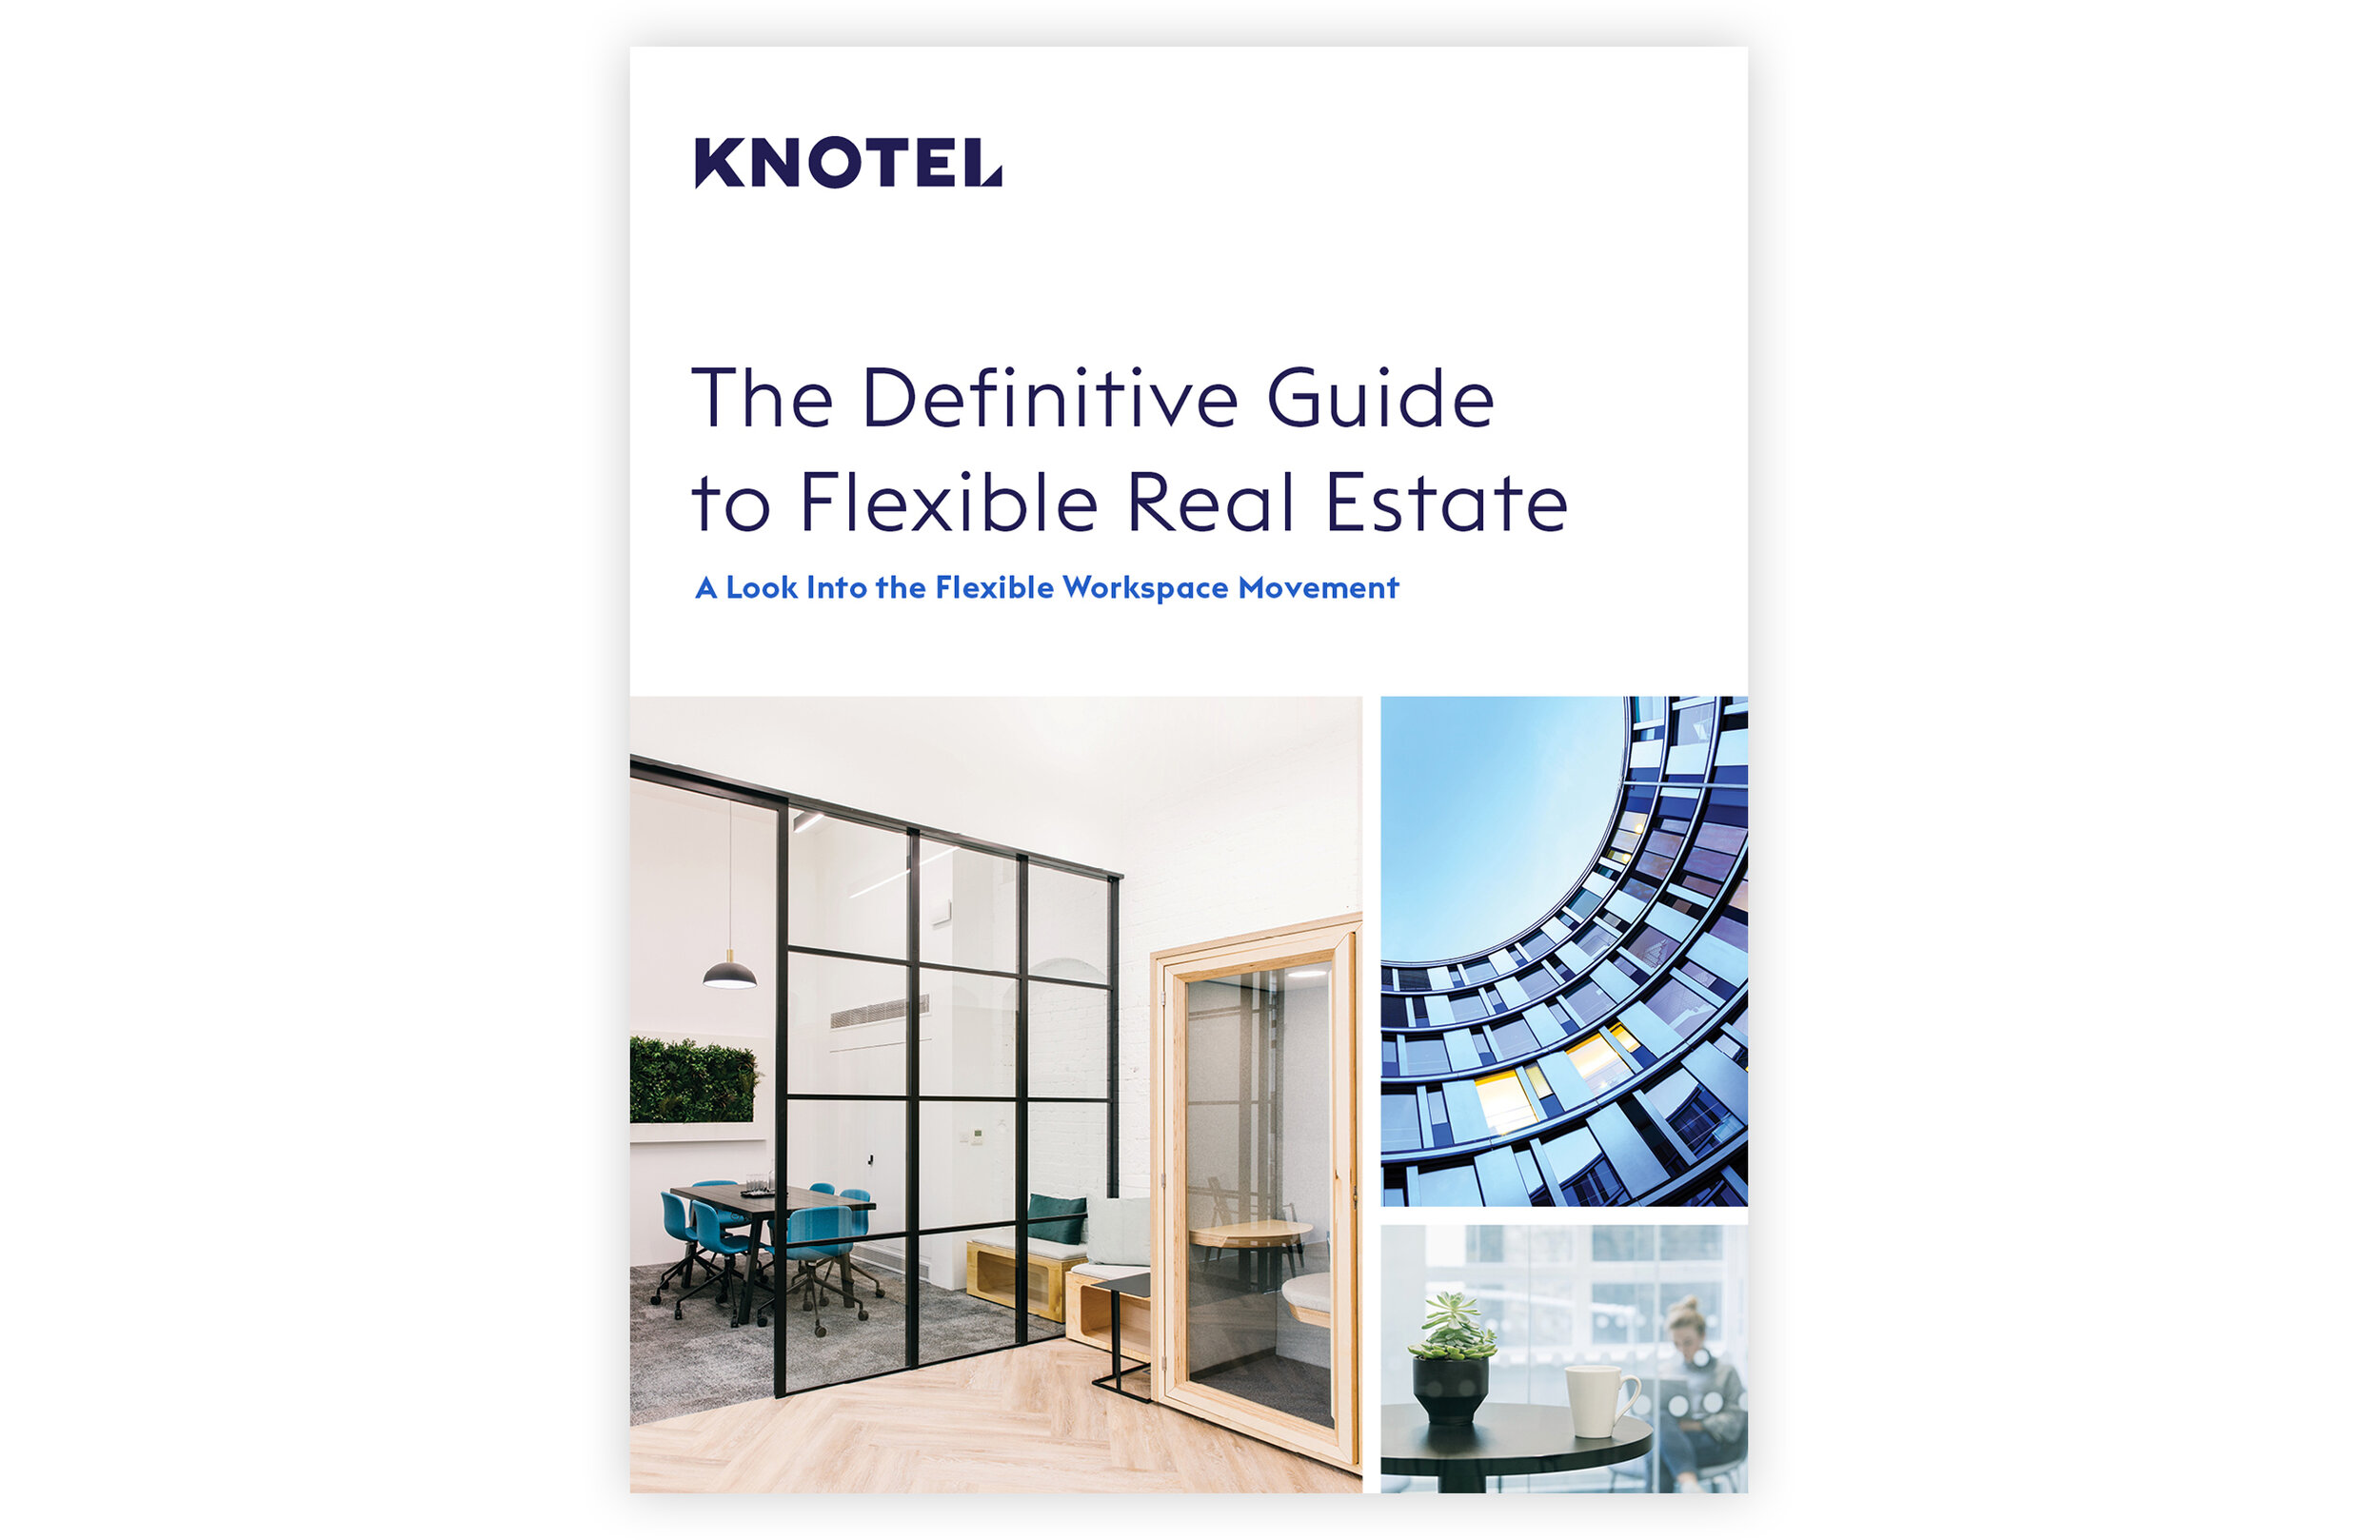 Knotel: The Definitive Guide to Flexible Real Estate